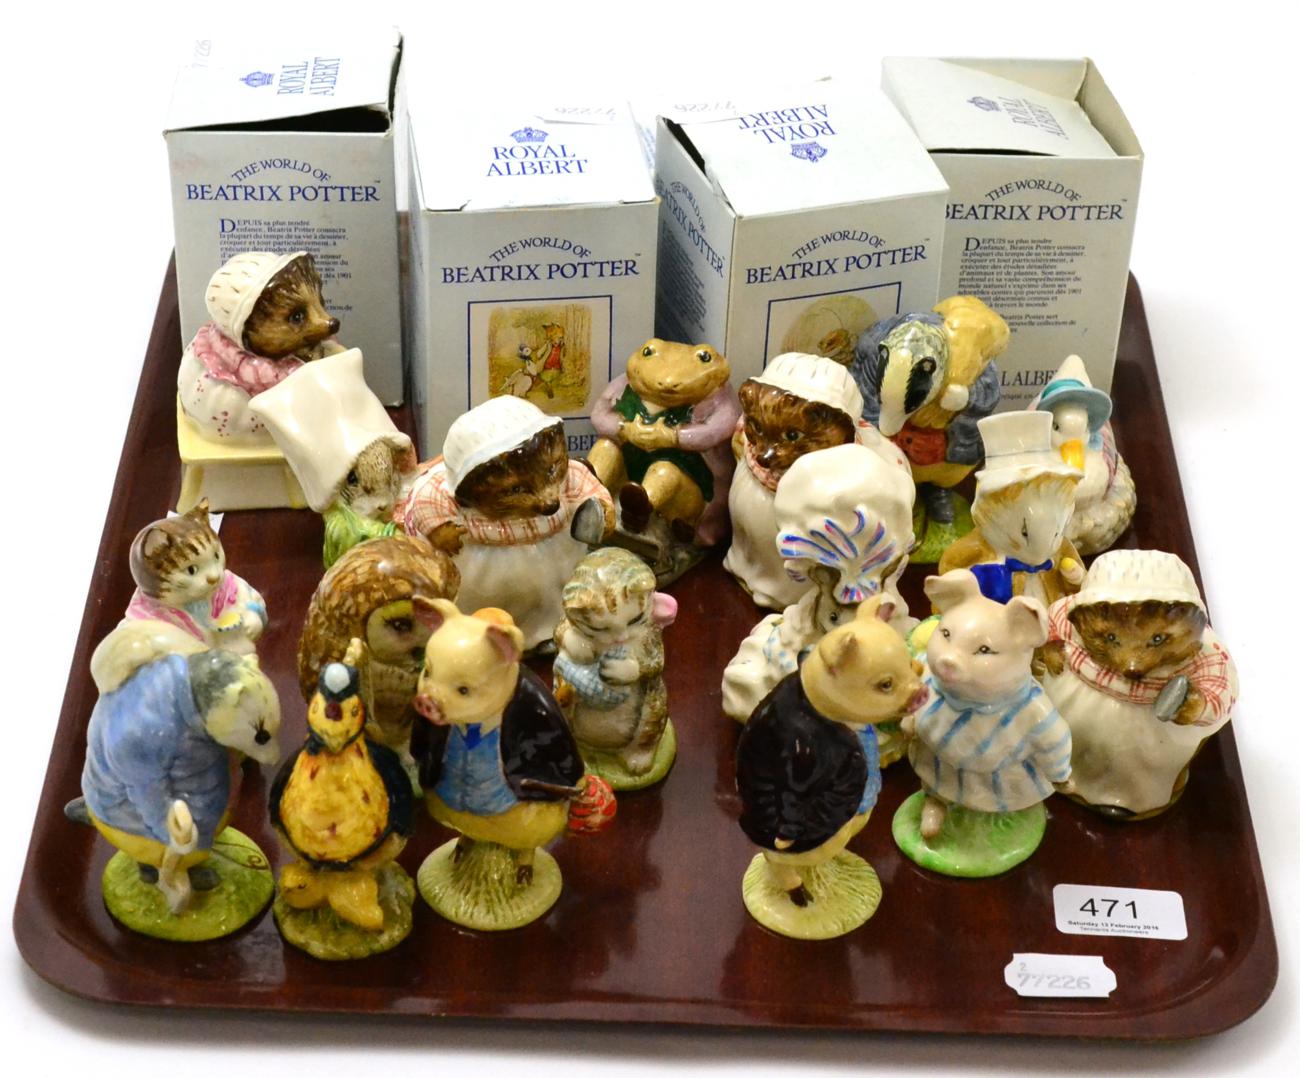 Beswick Beatrix Potter figures including Mrs Tiggy-Winkle, BP-2a; together with eleven figures all